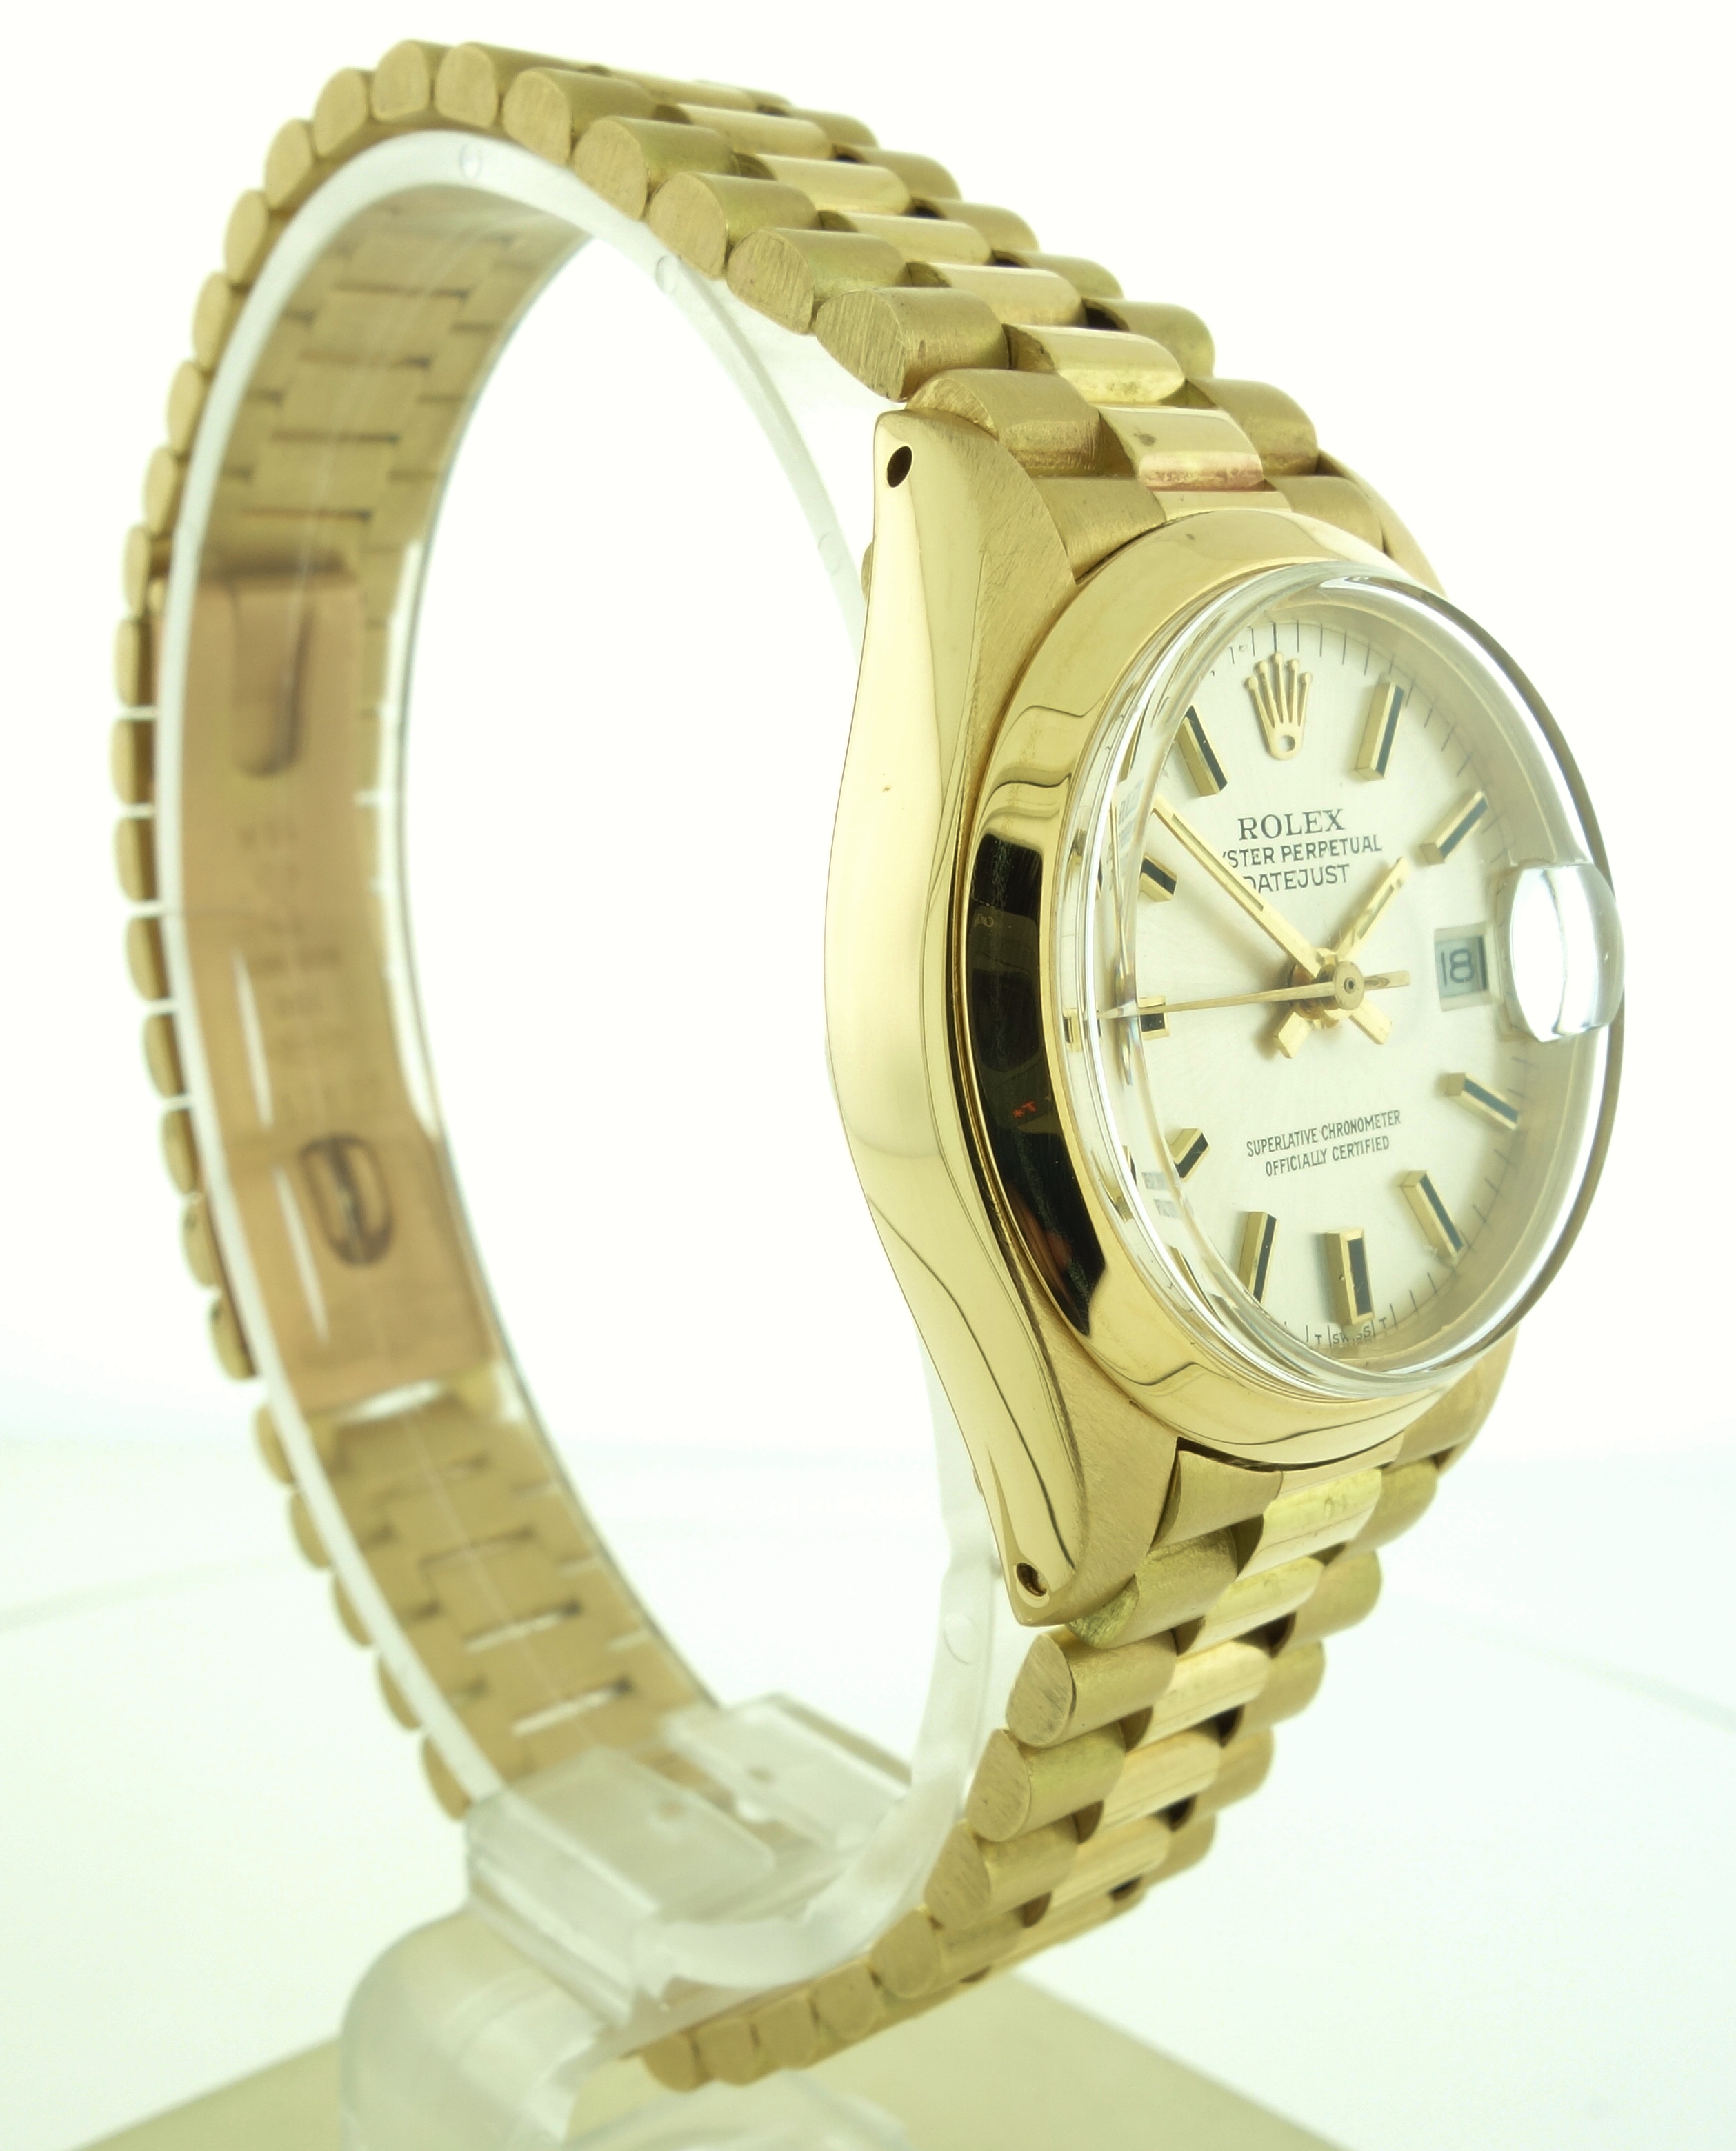 Rolex Lady Datejust – 6917 - Image 3 of 4